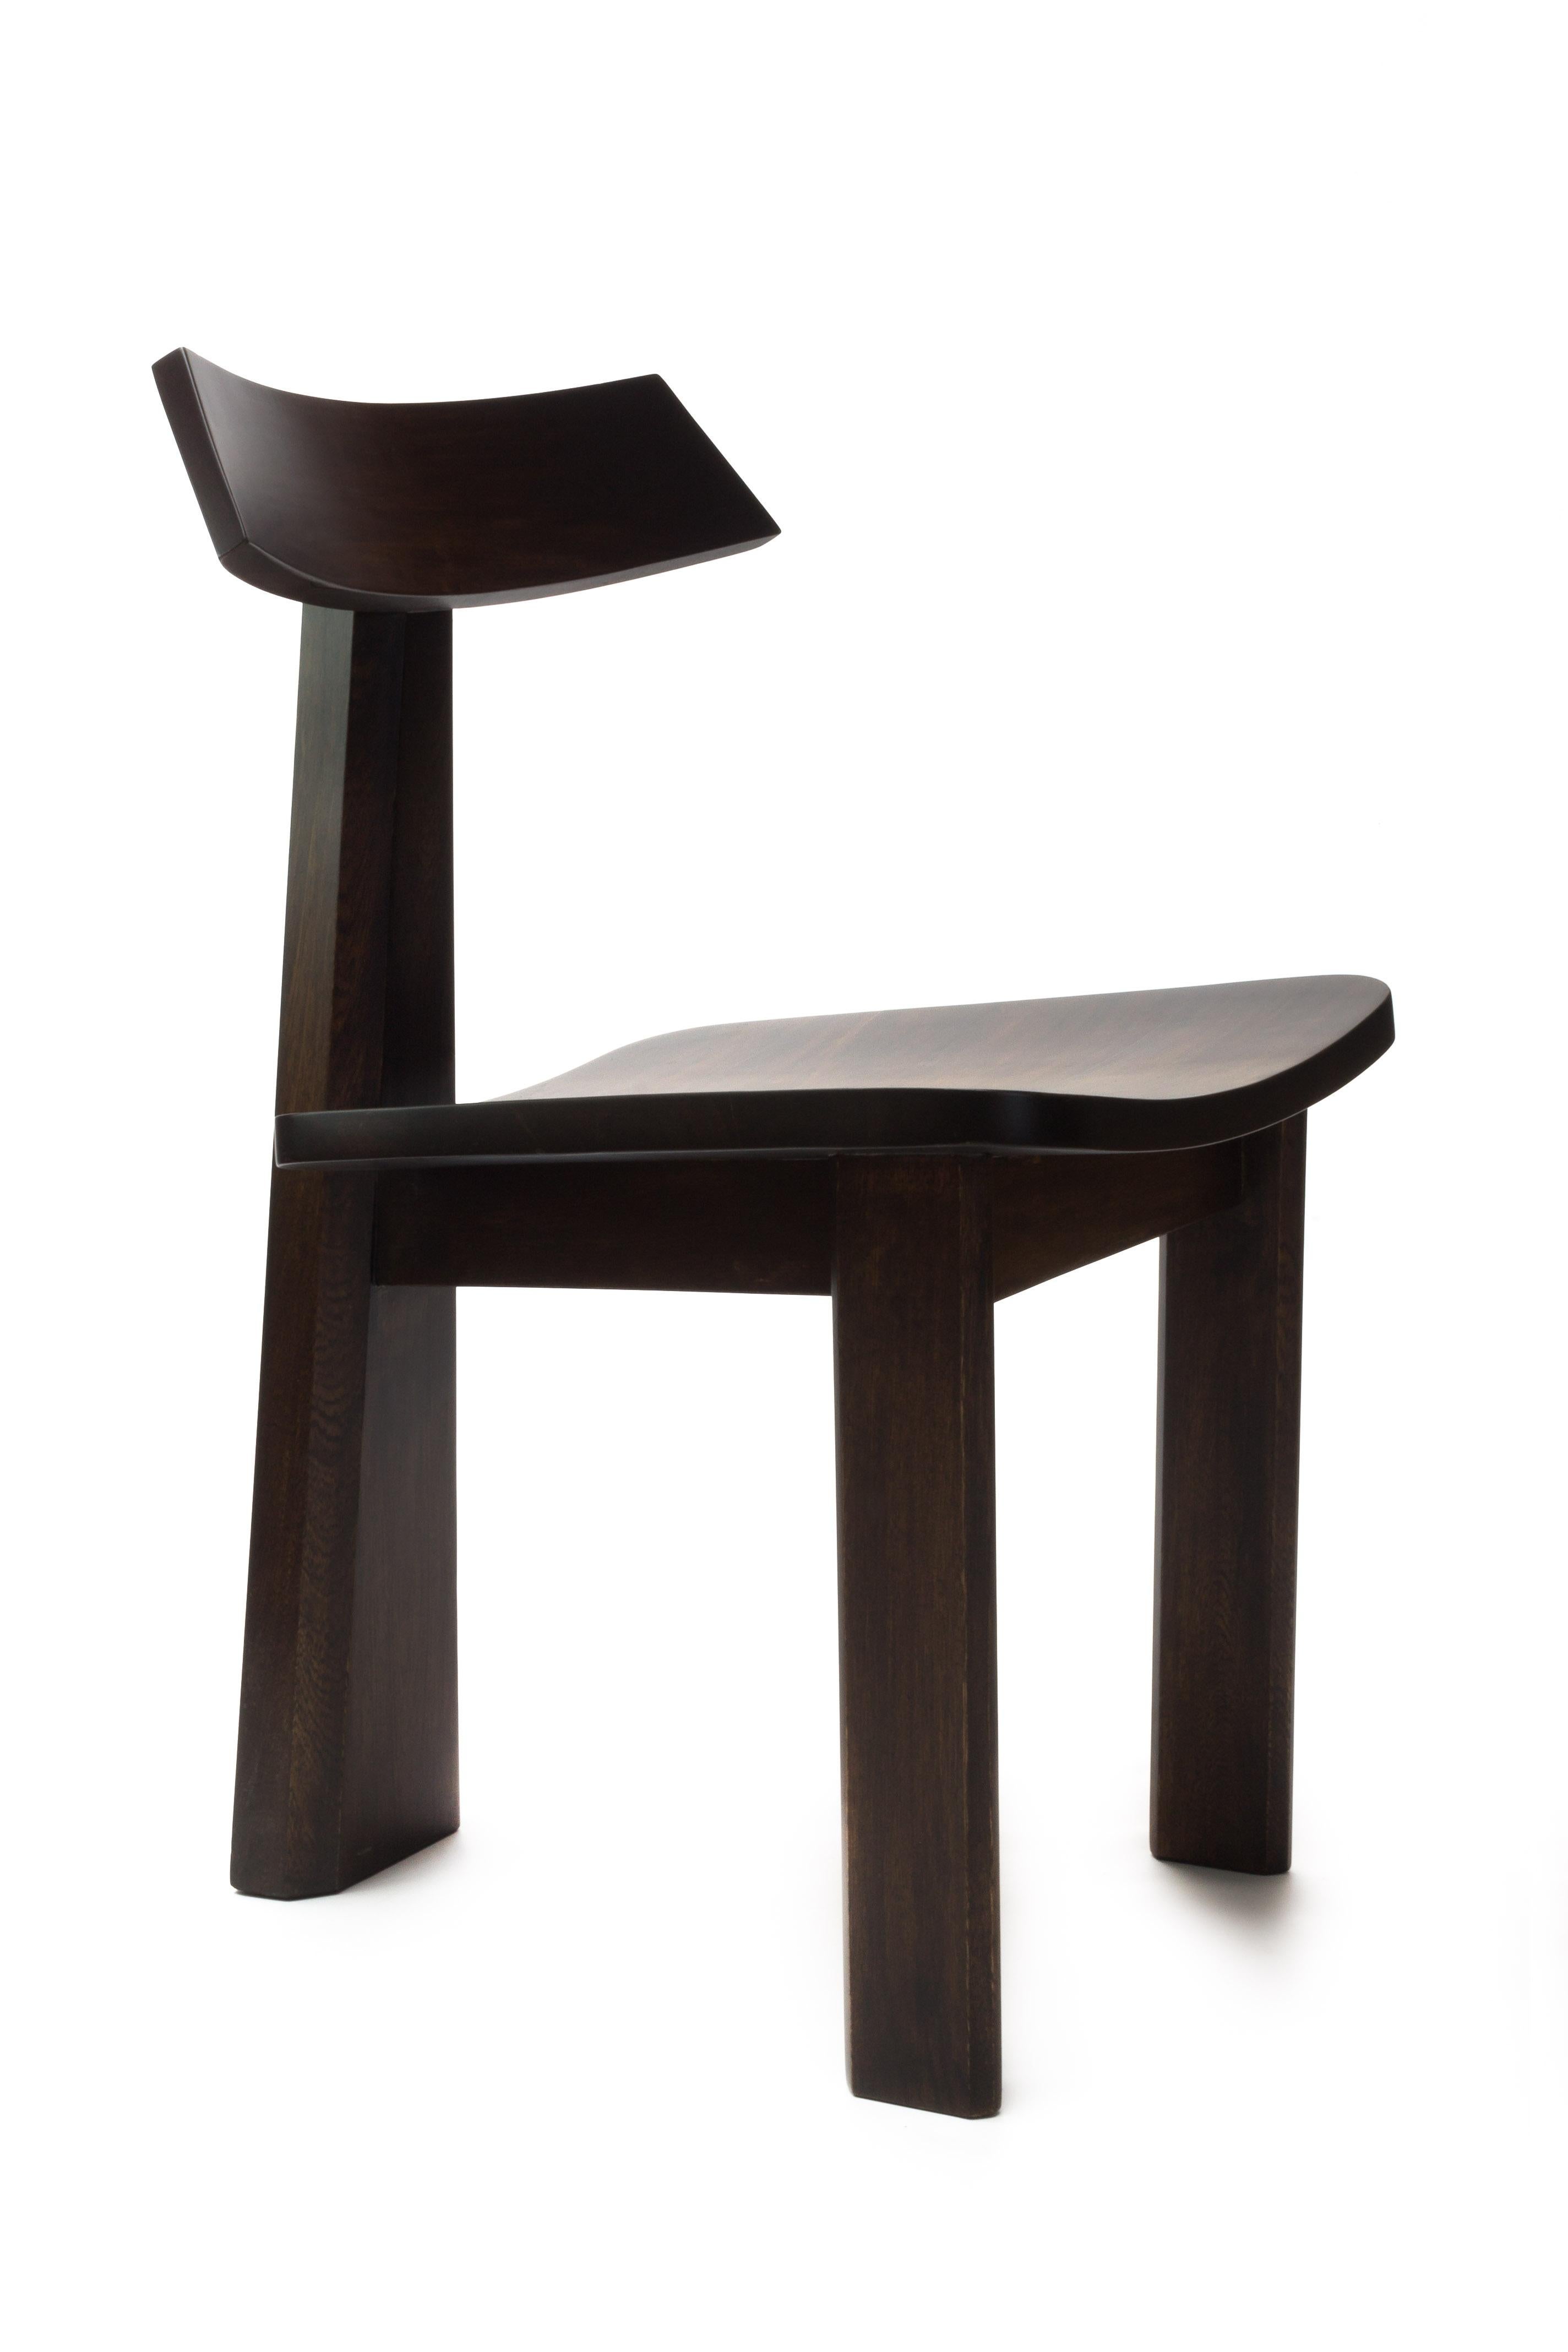 Dagon chair - by Camilo Andres Rodriguez Marquez
Dimensions: D 55 x W 50 x H 76 cm
Material: Wood
 

This piece takes its name from Dagon, the Babylonian God of fertility. It is composed of simple elements which convey a metaphorical dialogue within